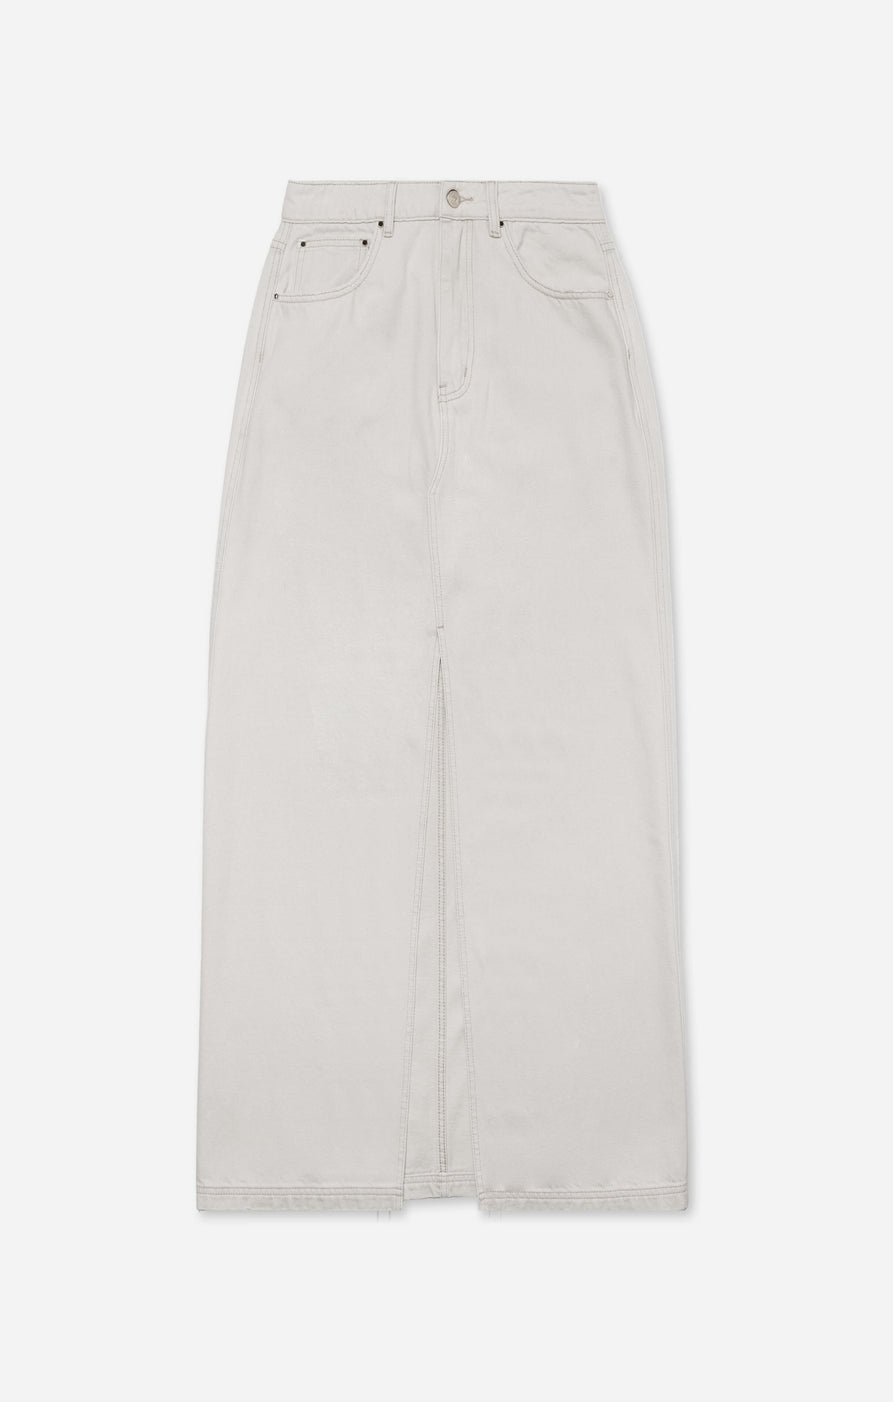 THE DENIM MAXI SKIRT - WASHED STONE – All Things Golden